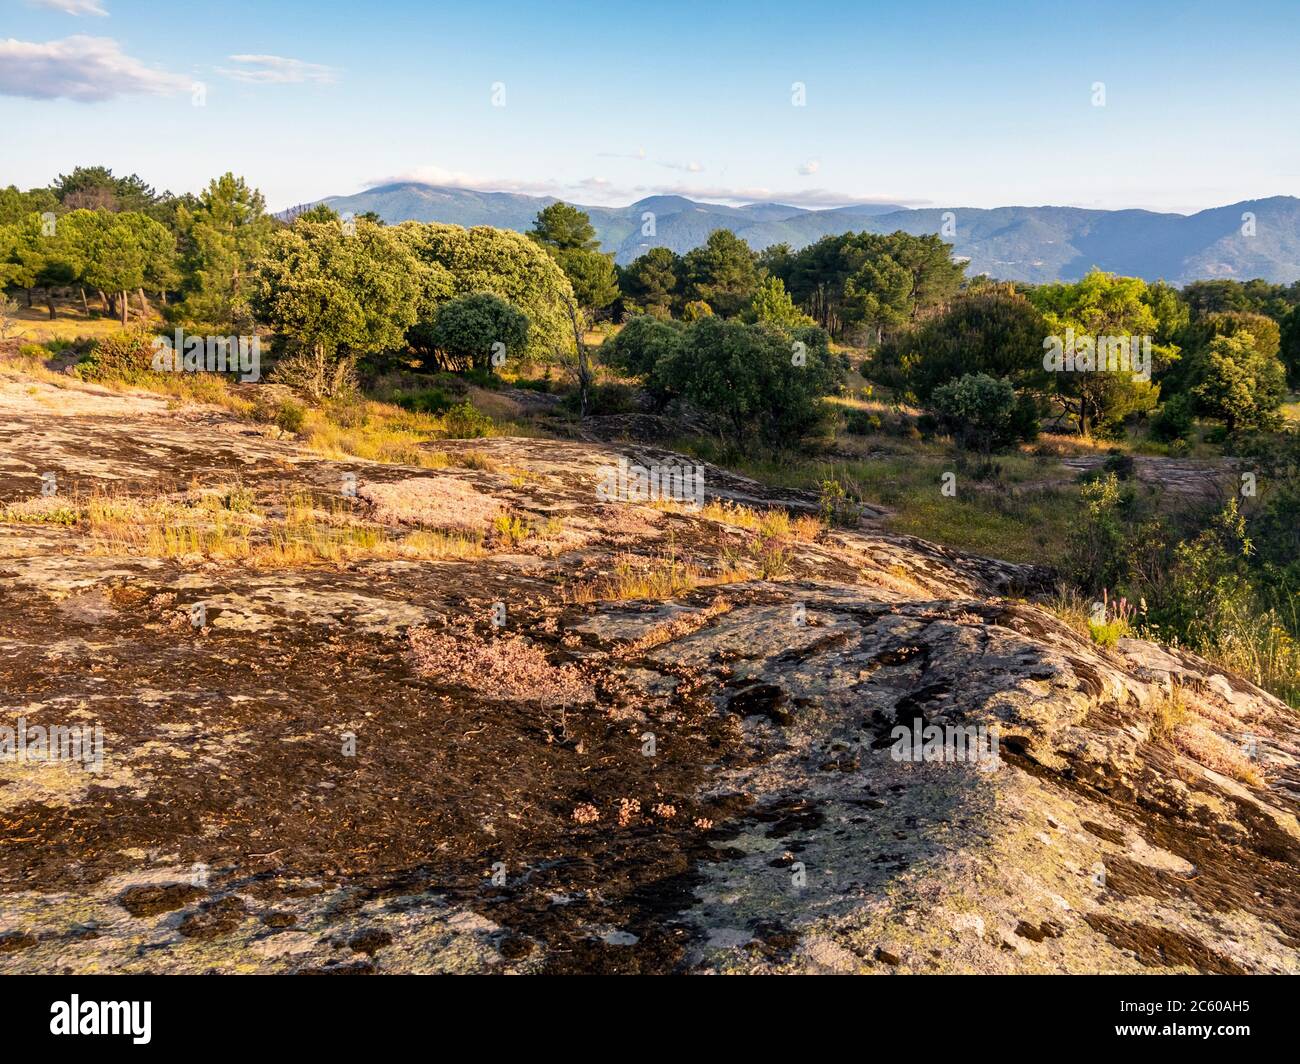 The Piquillo pinewood and Sierra de Gredos on the background in spring time. Madrid. Spain. Europe. Stock Photo